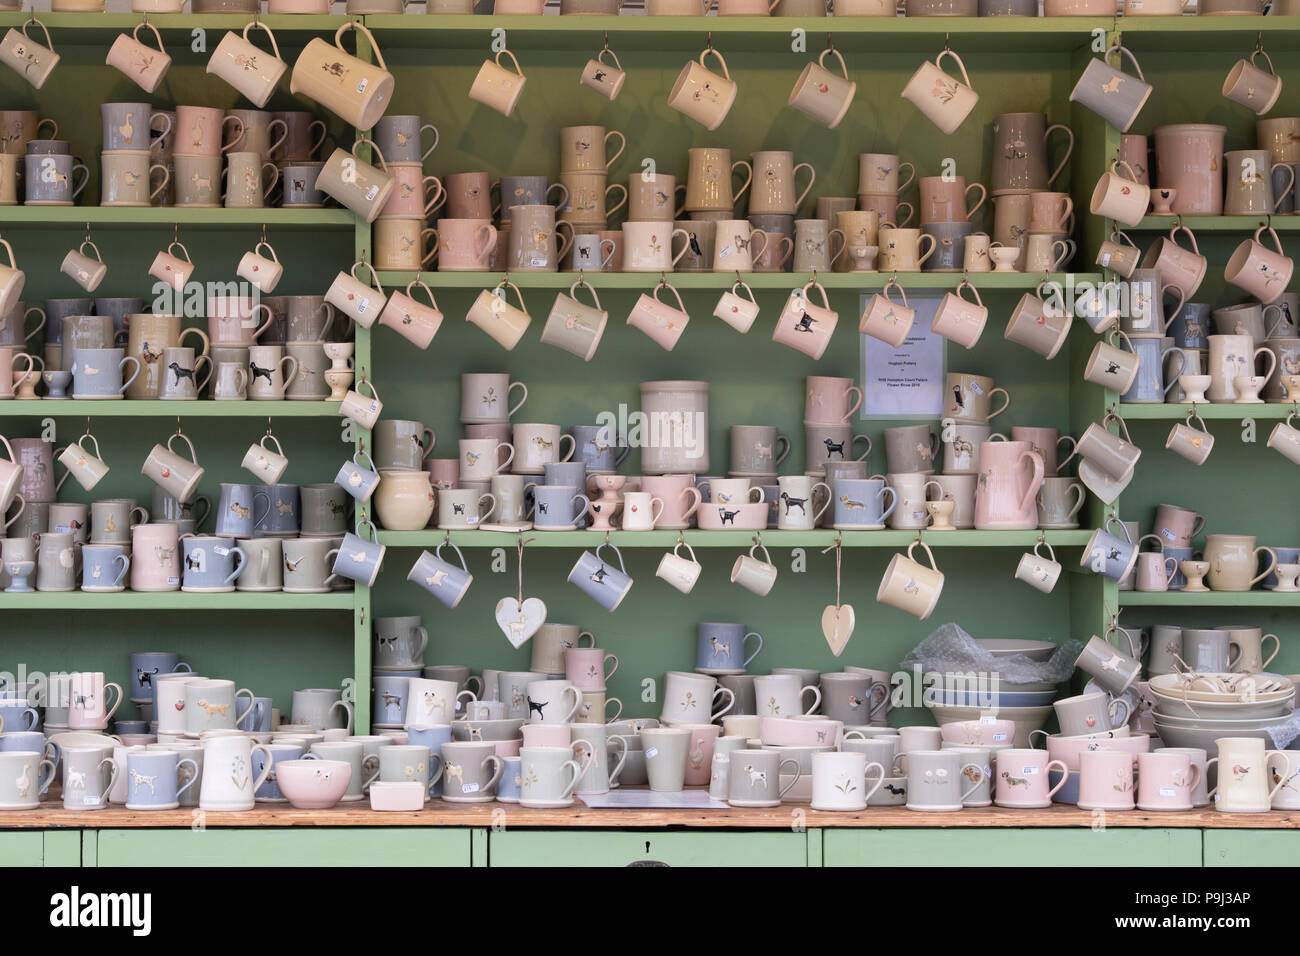 Hogben pottery stand at hampton court flower show 2018. London. UK Stock Photo